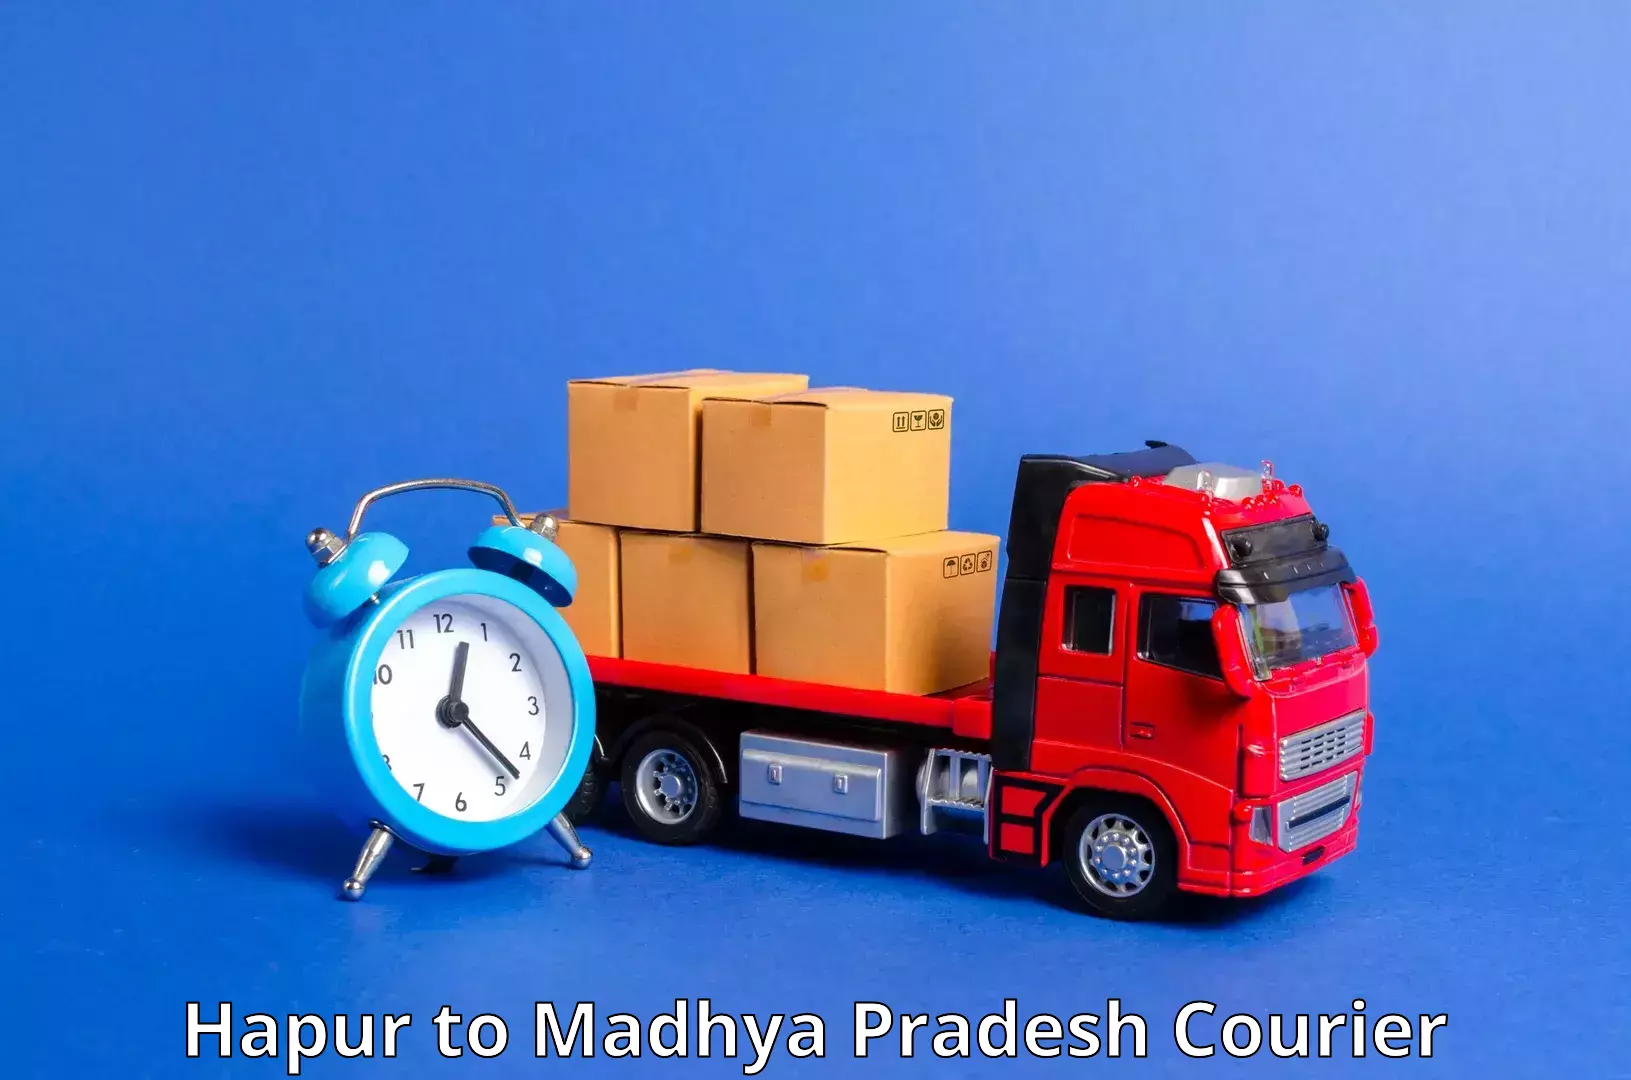 24-hour courier service Hapur to Depalpur